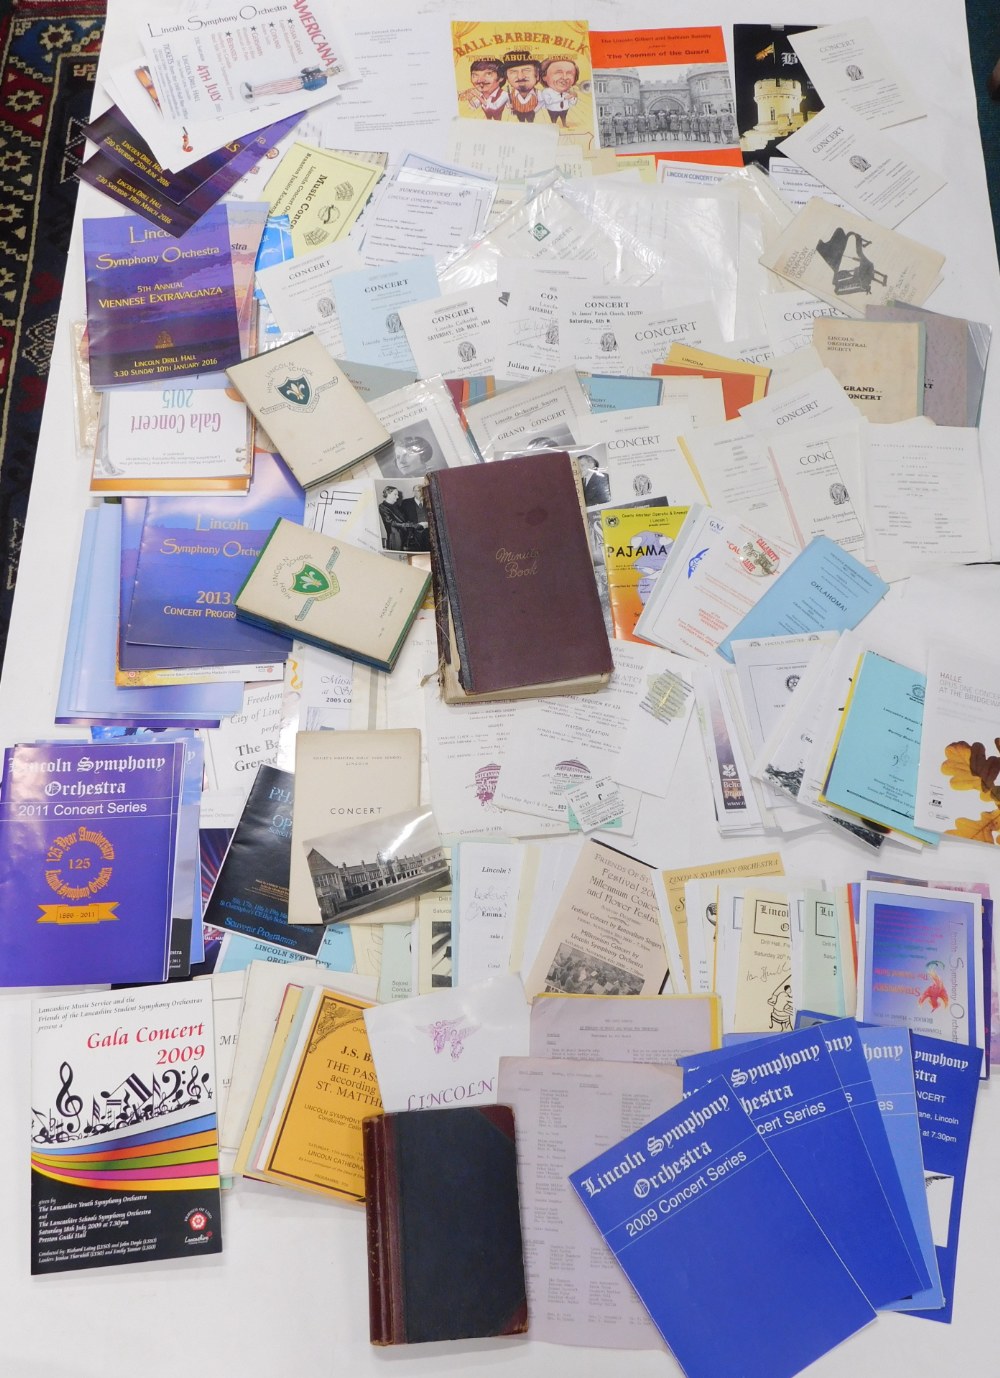 Lincolnshire, a quantity of ephemera relating to Lincolnshire local music and theatre groups.